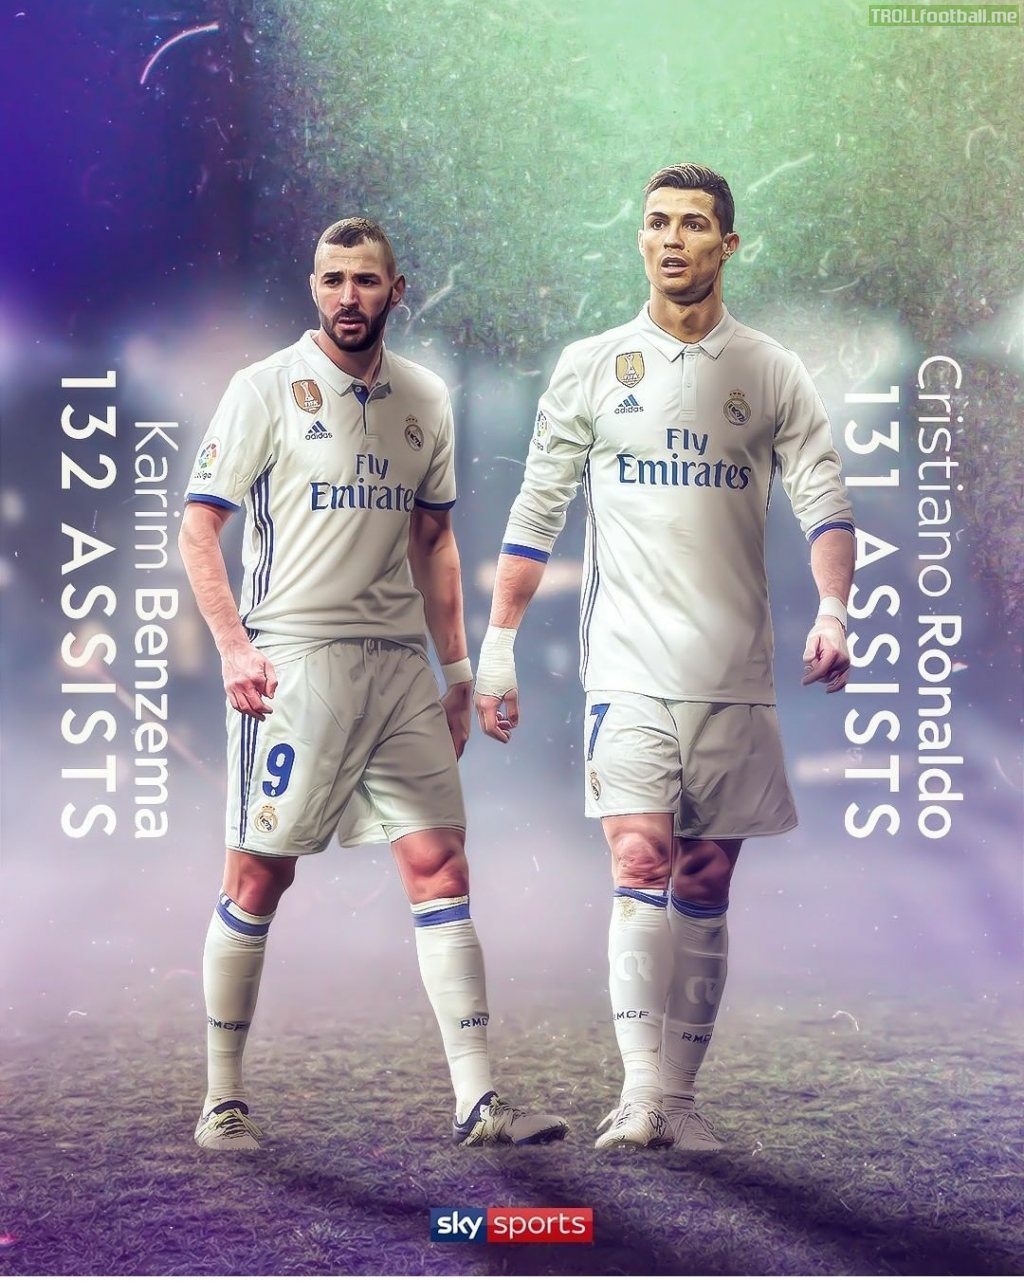 Karim Benzema surpasses Cristiano Ronaldo's Real Madrid record of most assists at the club 🤝🇫🇷